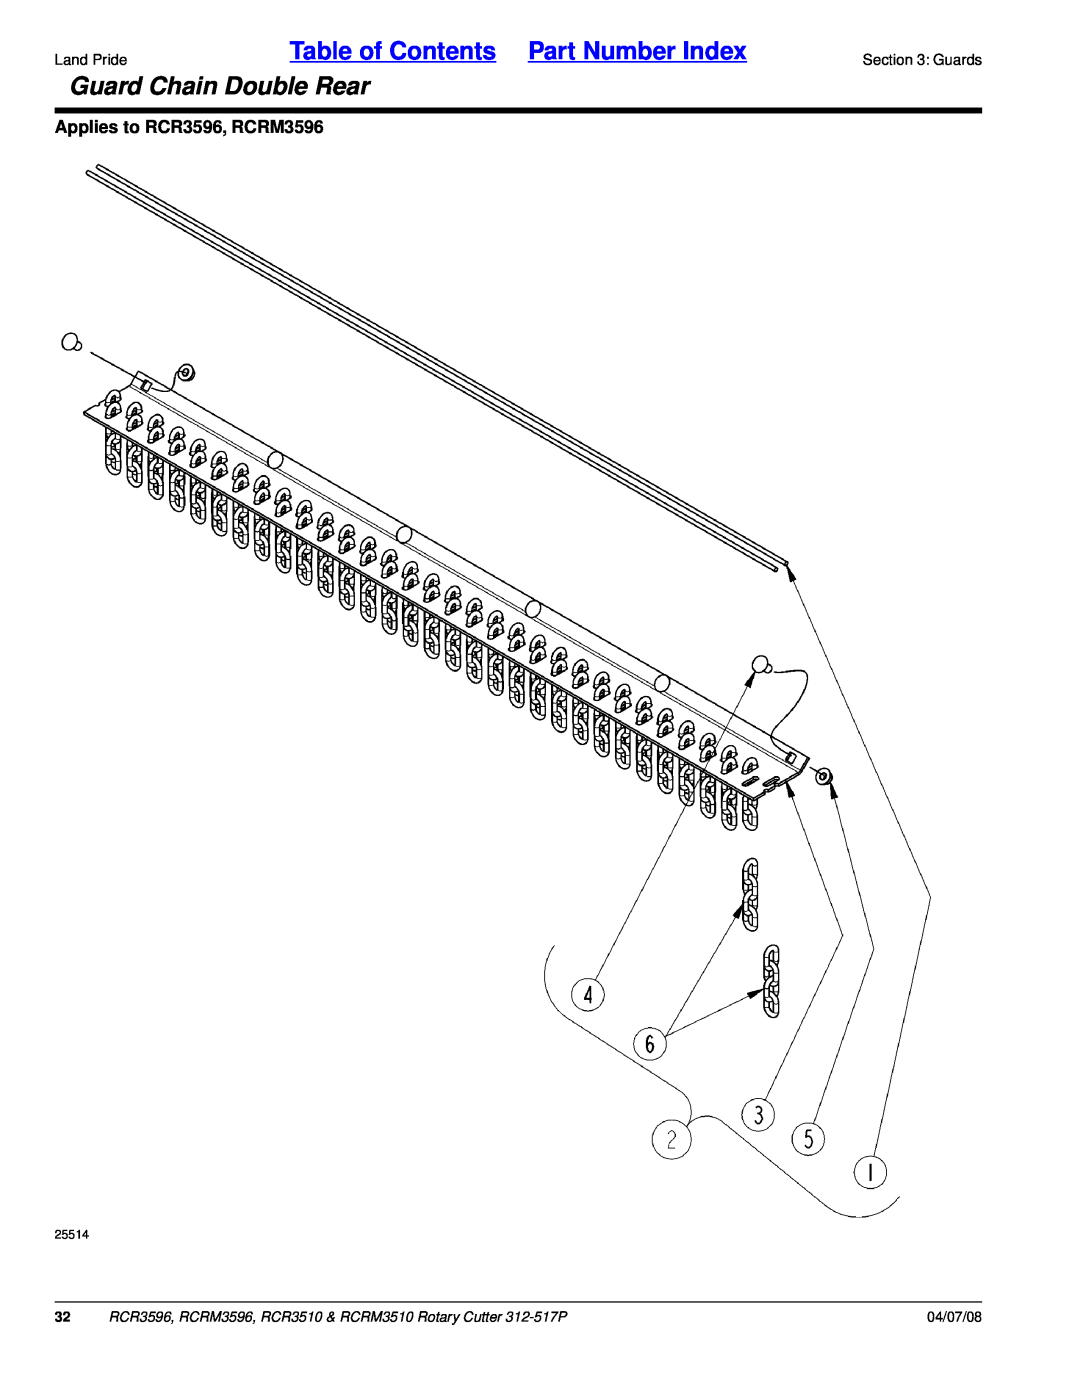 Land Pride RCR3510 Guard Chain Double Rear, Table of Contents Part Number Index, Applies to RCR3596, RCRM3596, 04/07/08 